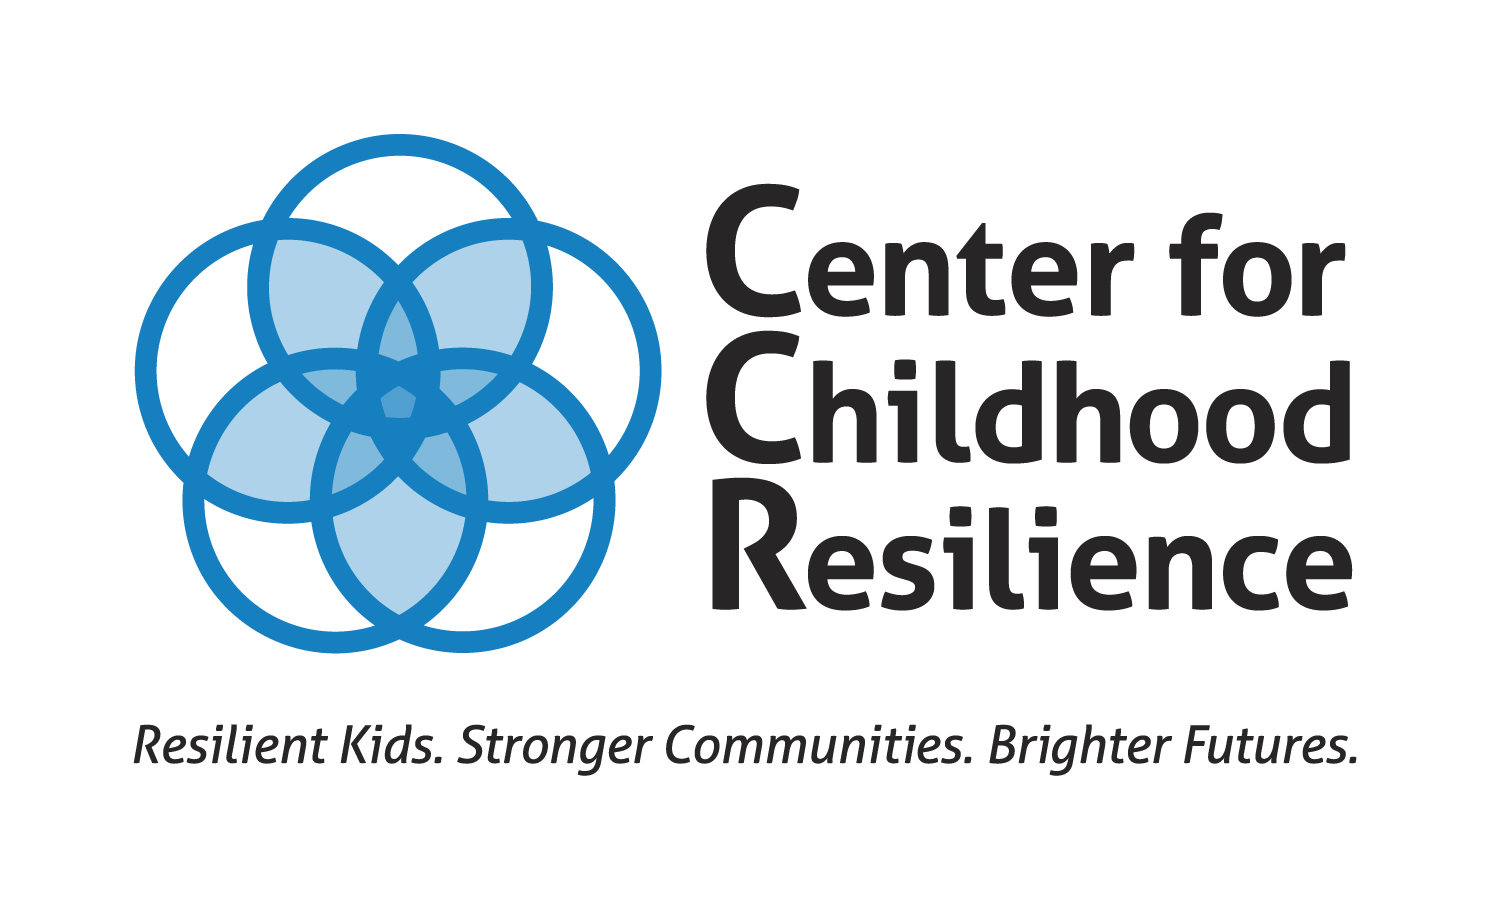 Center for Childhood Resilience